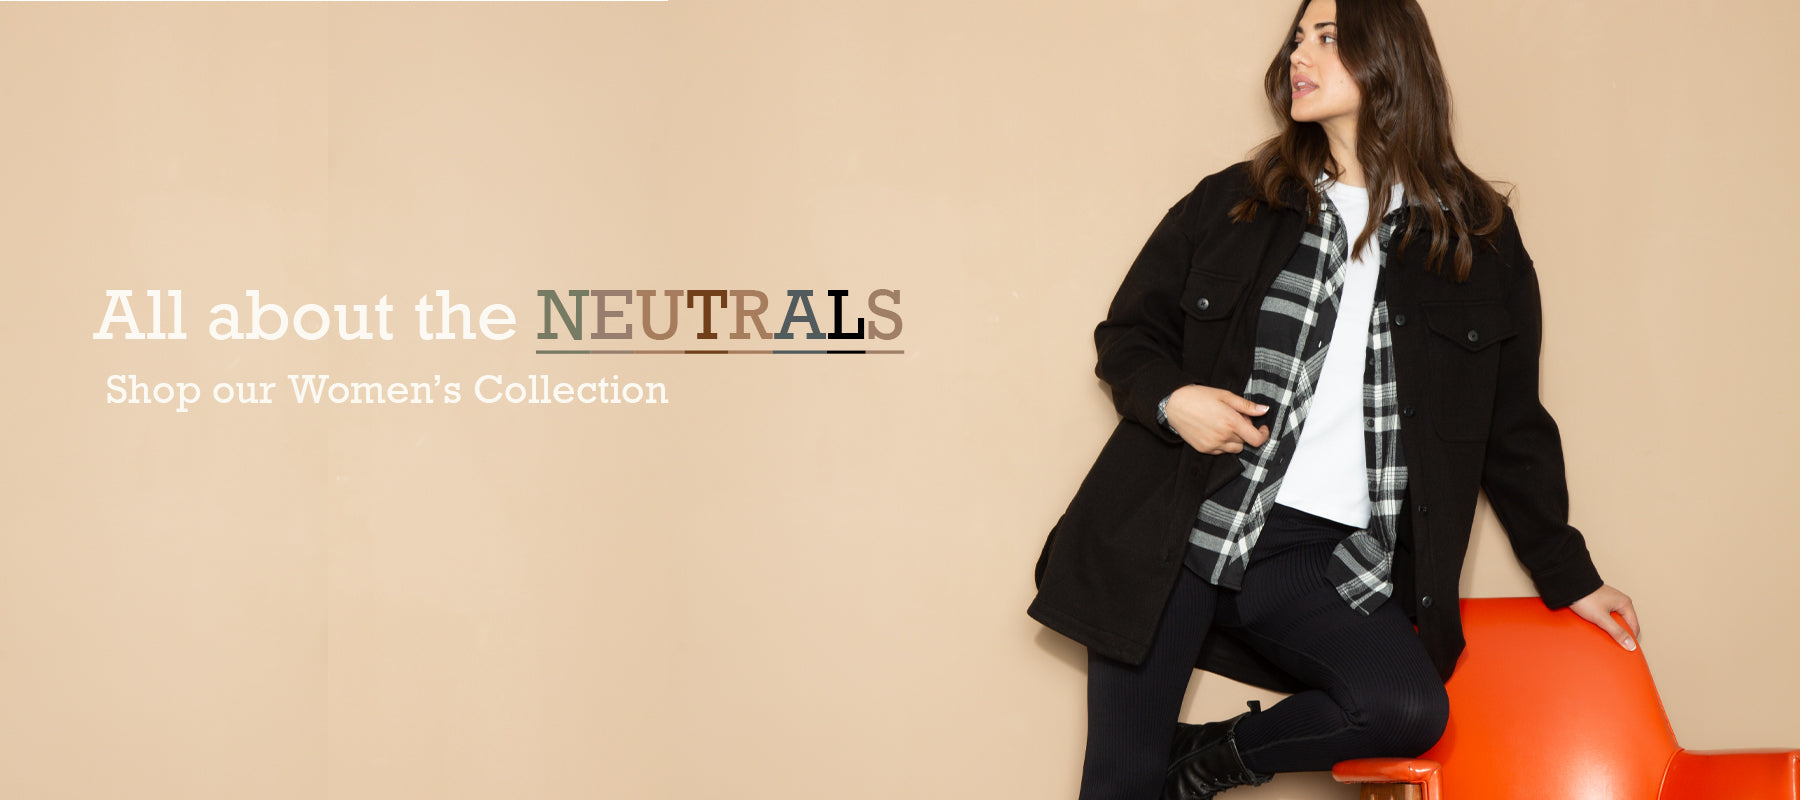 Shop our women's collections. It's all about the neutrals this season.